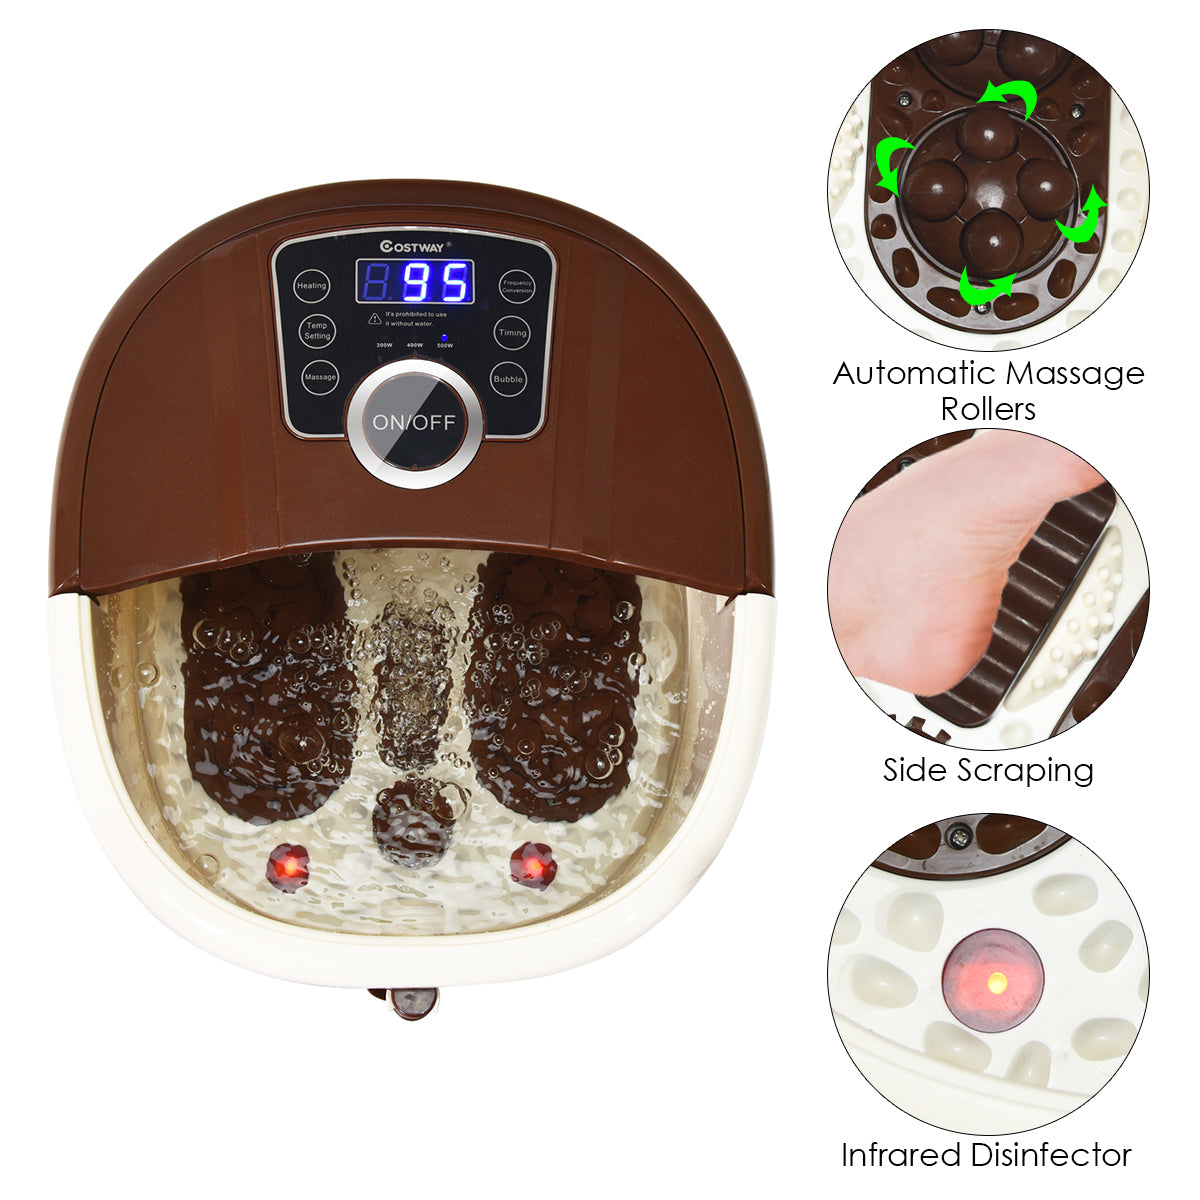 Giantex Foot Spa Bath Massager with Heat with 16 Pedicure Shiatsu Roller Massage Points